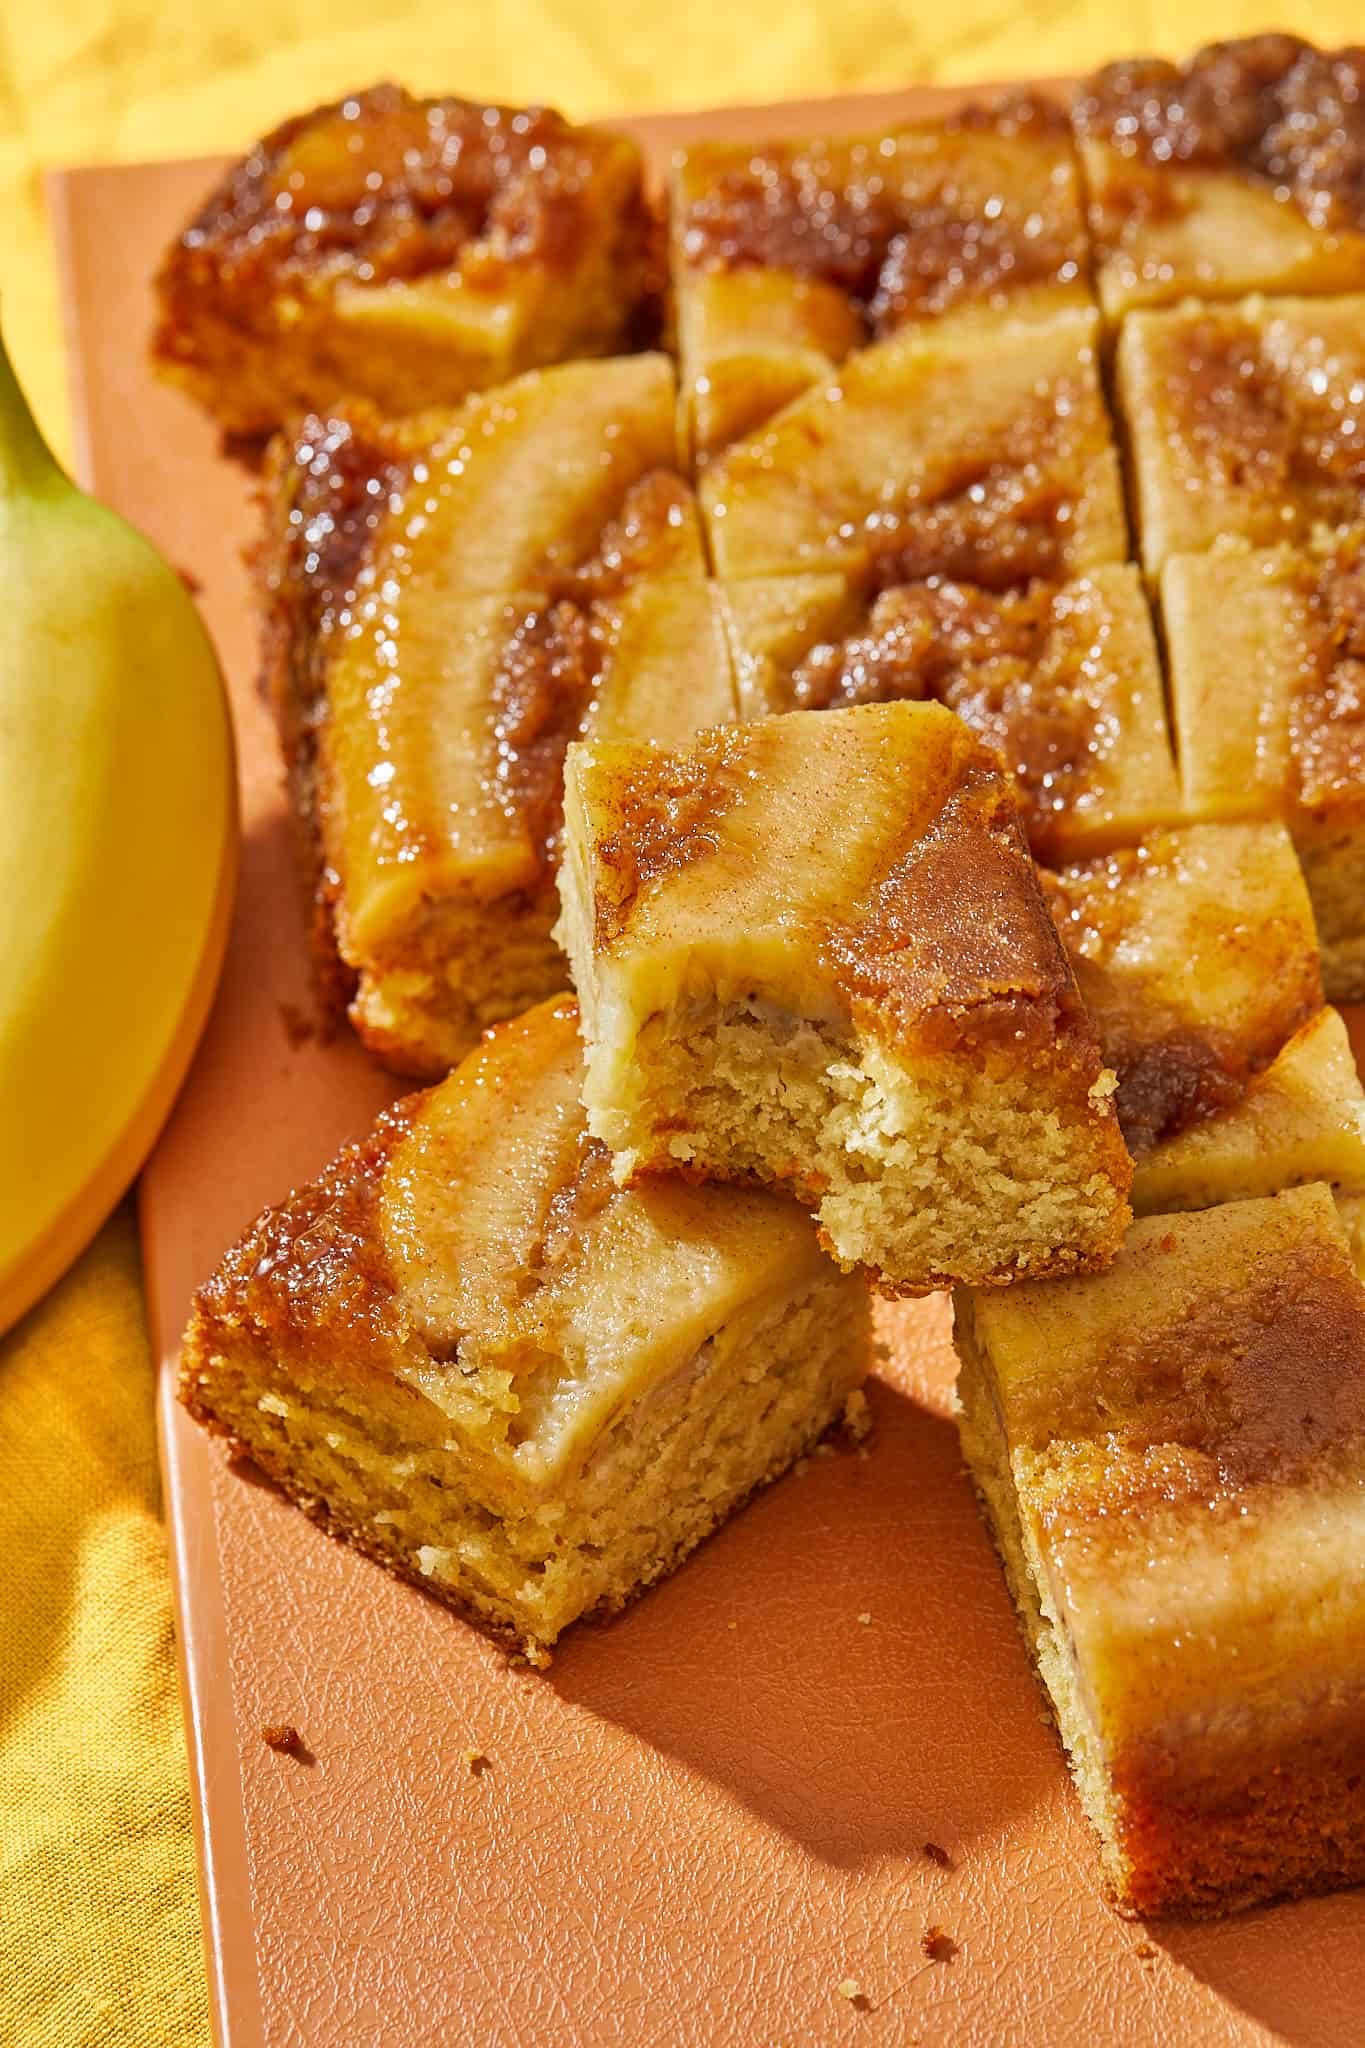 A gooey caramelized banana upside down cake with slices cut out.